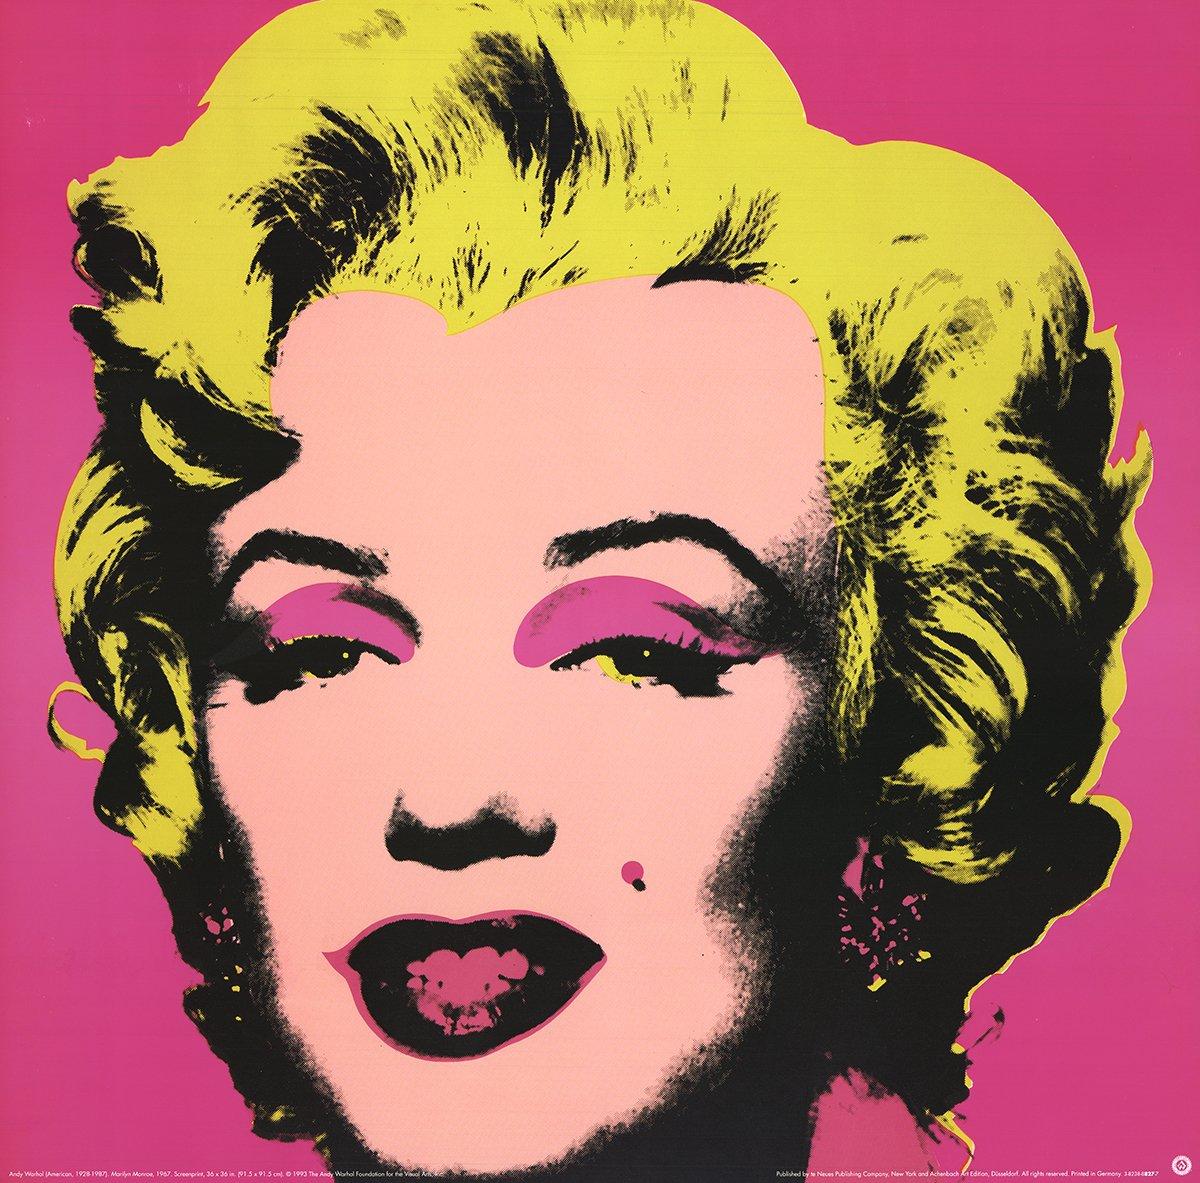 Paper Size: 25.5 x 25.5 inches ( 64.77 x 64.77 cm )
Image Size: 25.5 x 25.5 inches ( 64.77 x 64.77 cm )
Framed: No
Condition: A: Mint

Additional Details: Marilyn Pink by Andy Warhol, printed in 1993, published by Te neues Publishing in Kempen,